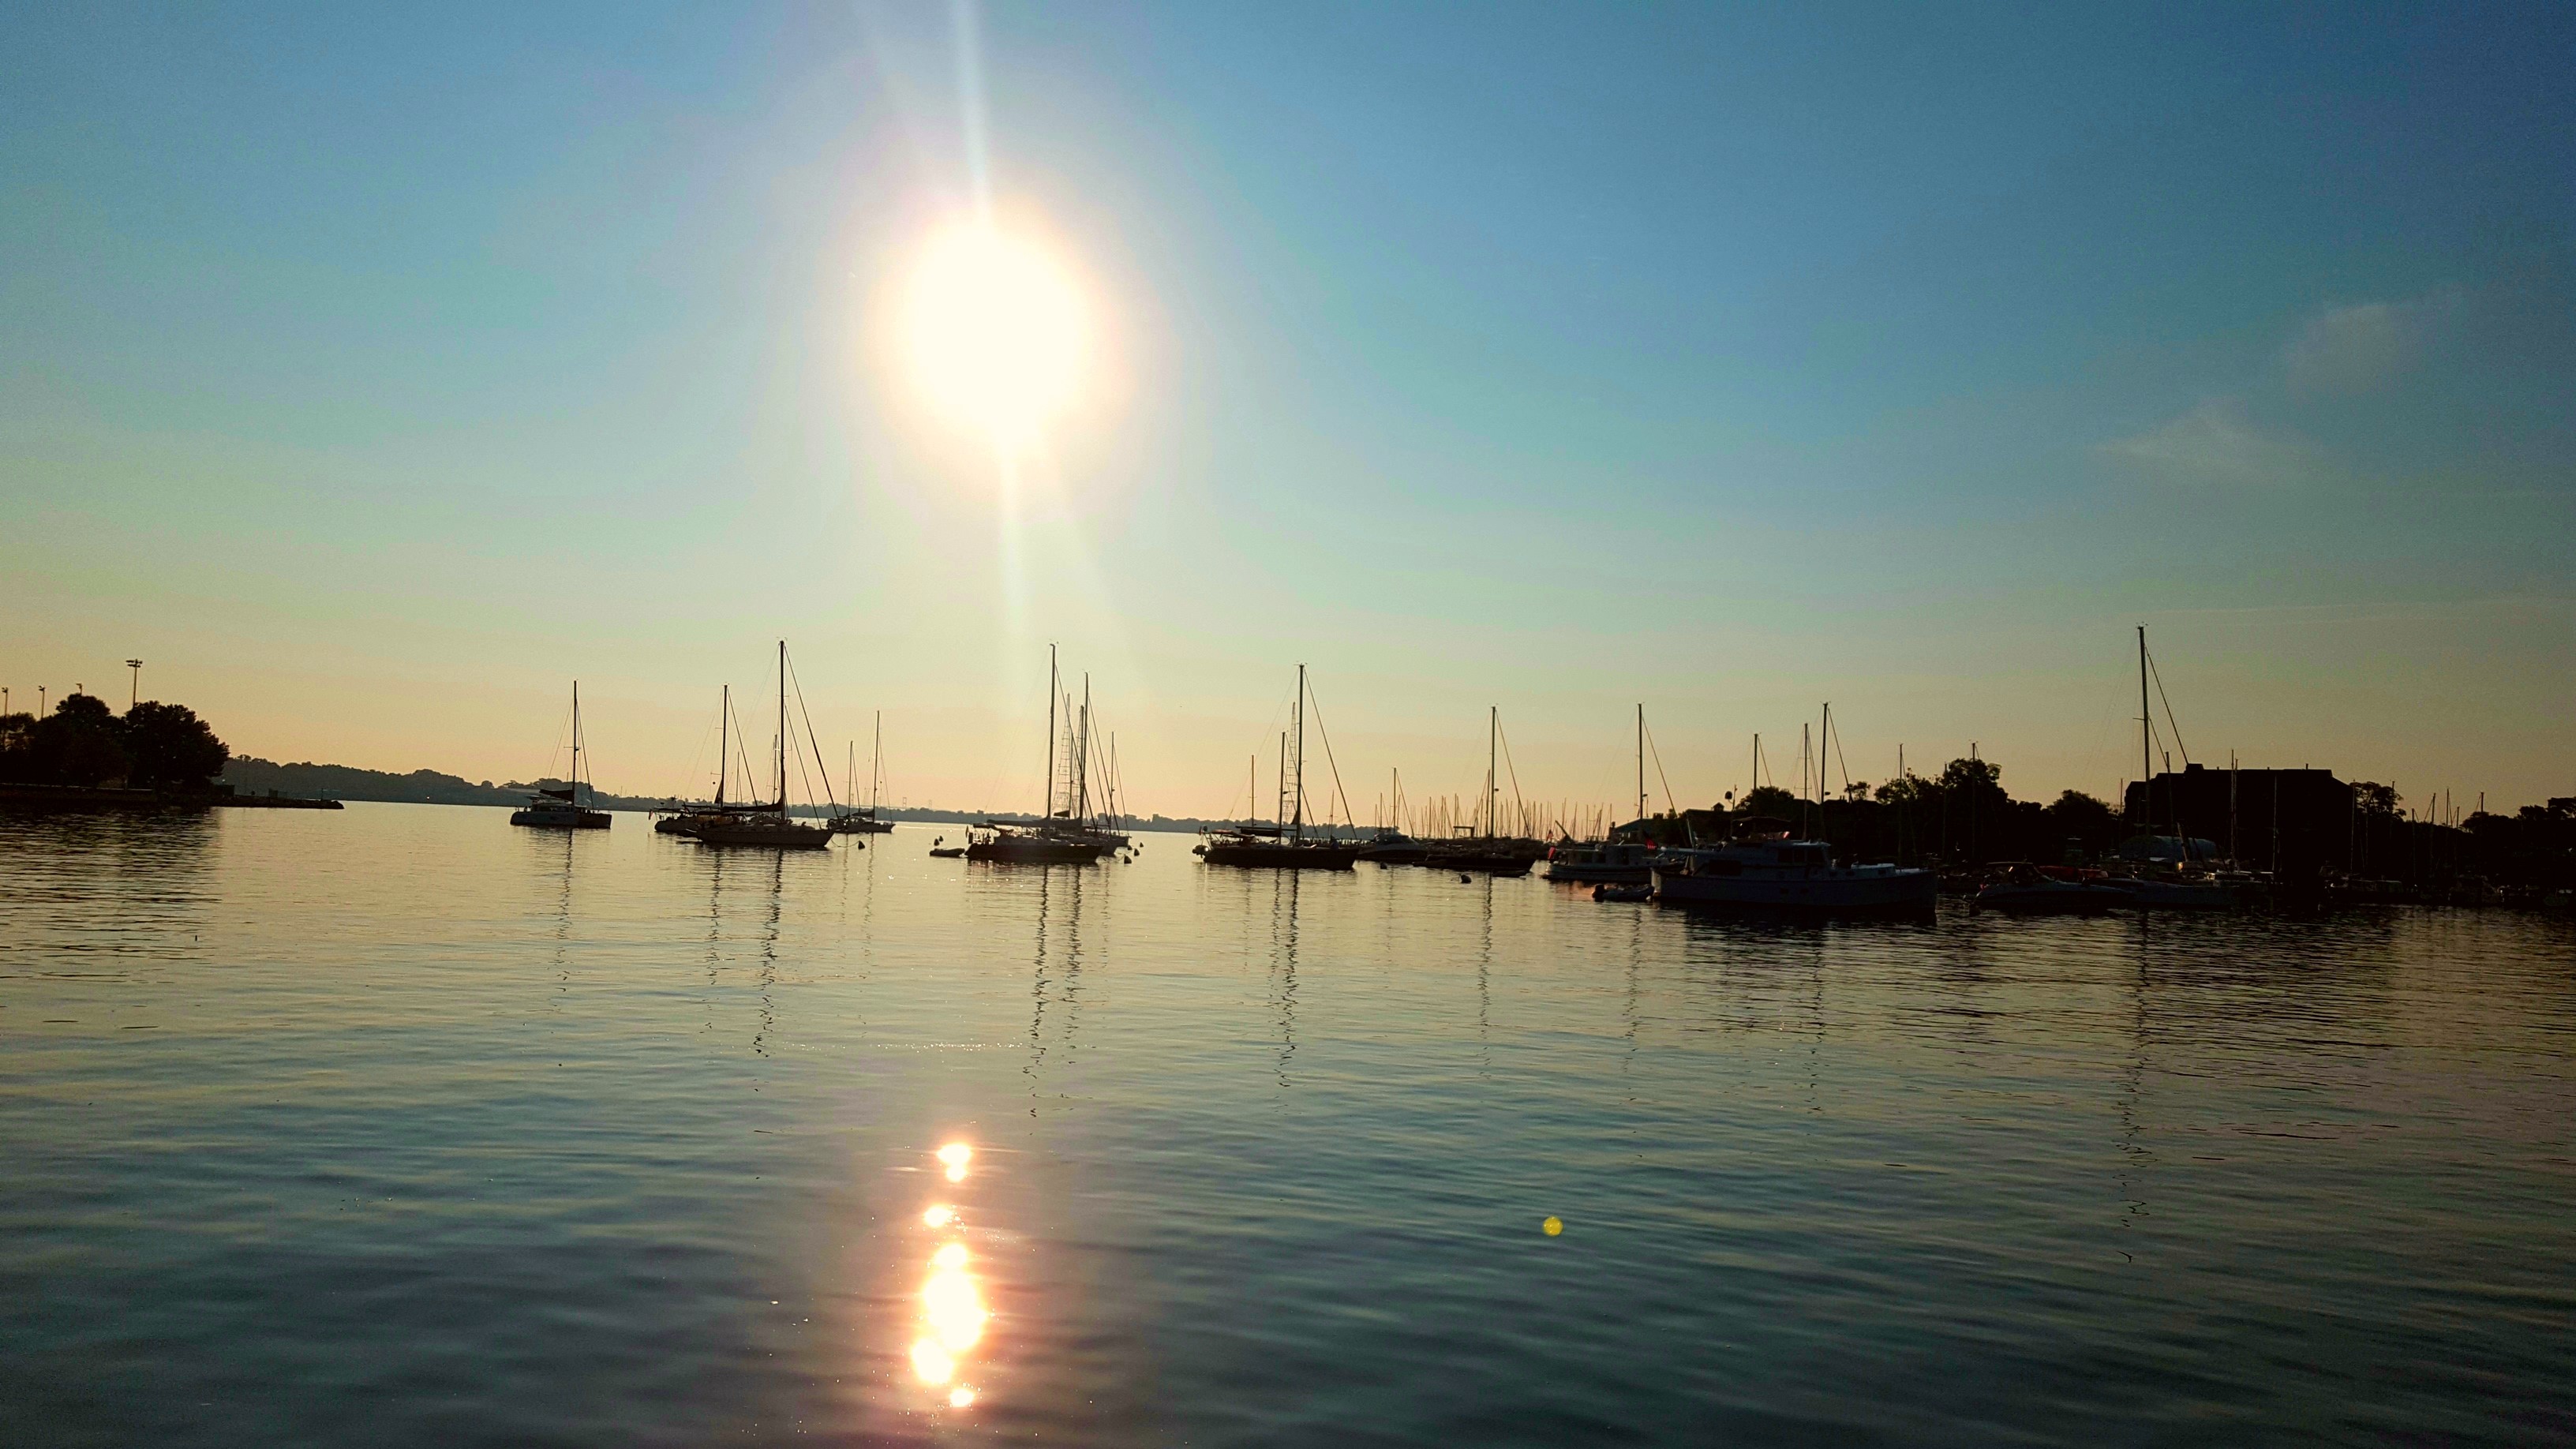 Sun coming up over the calm waters and moored boats in the harbor